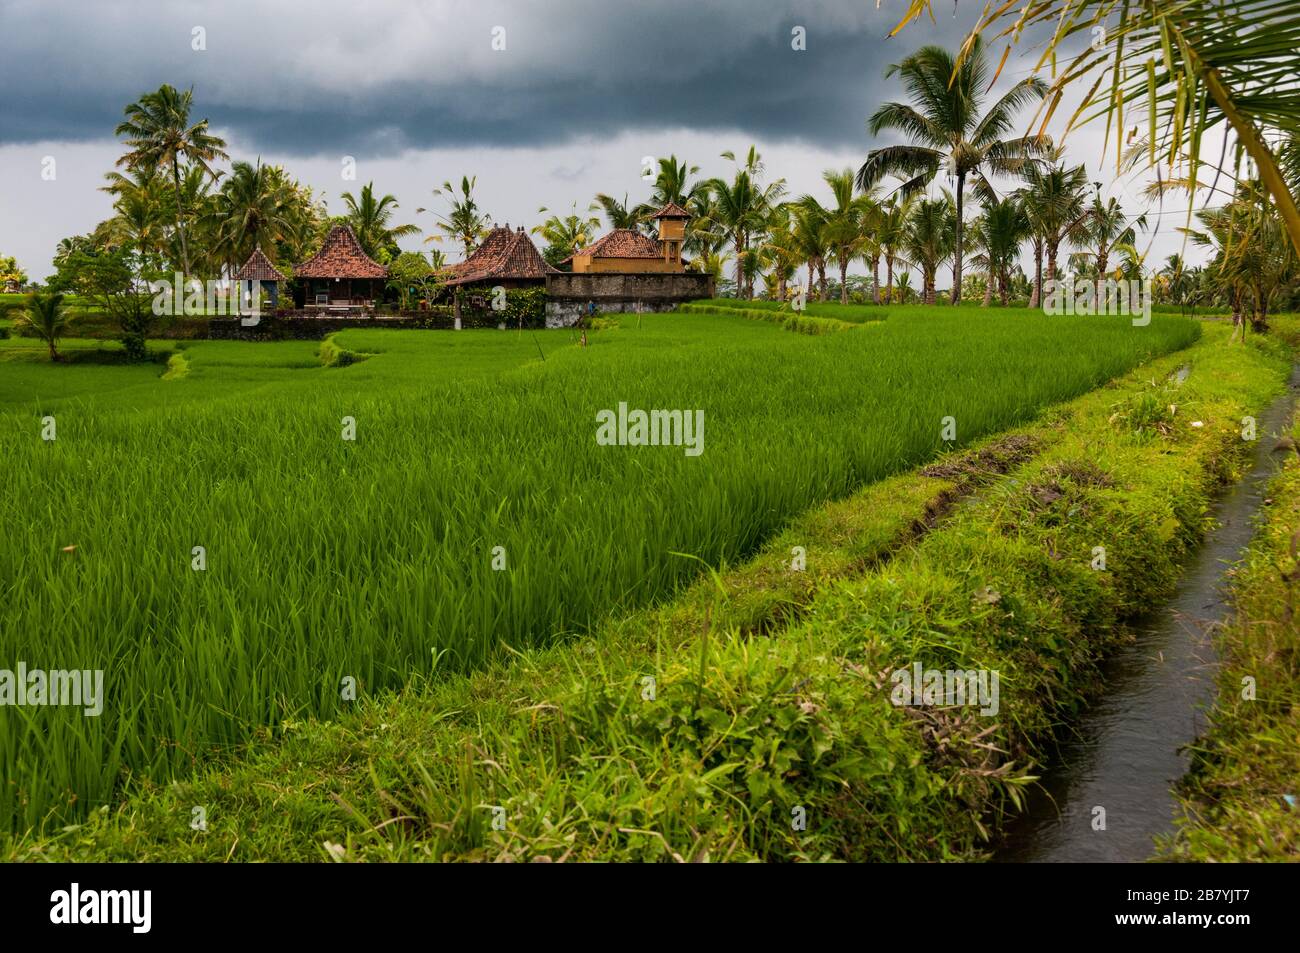 A terraced rice field under a leaden sky fringed by palm trees in the hills above Ubud, Bali Stock Photo